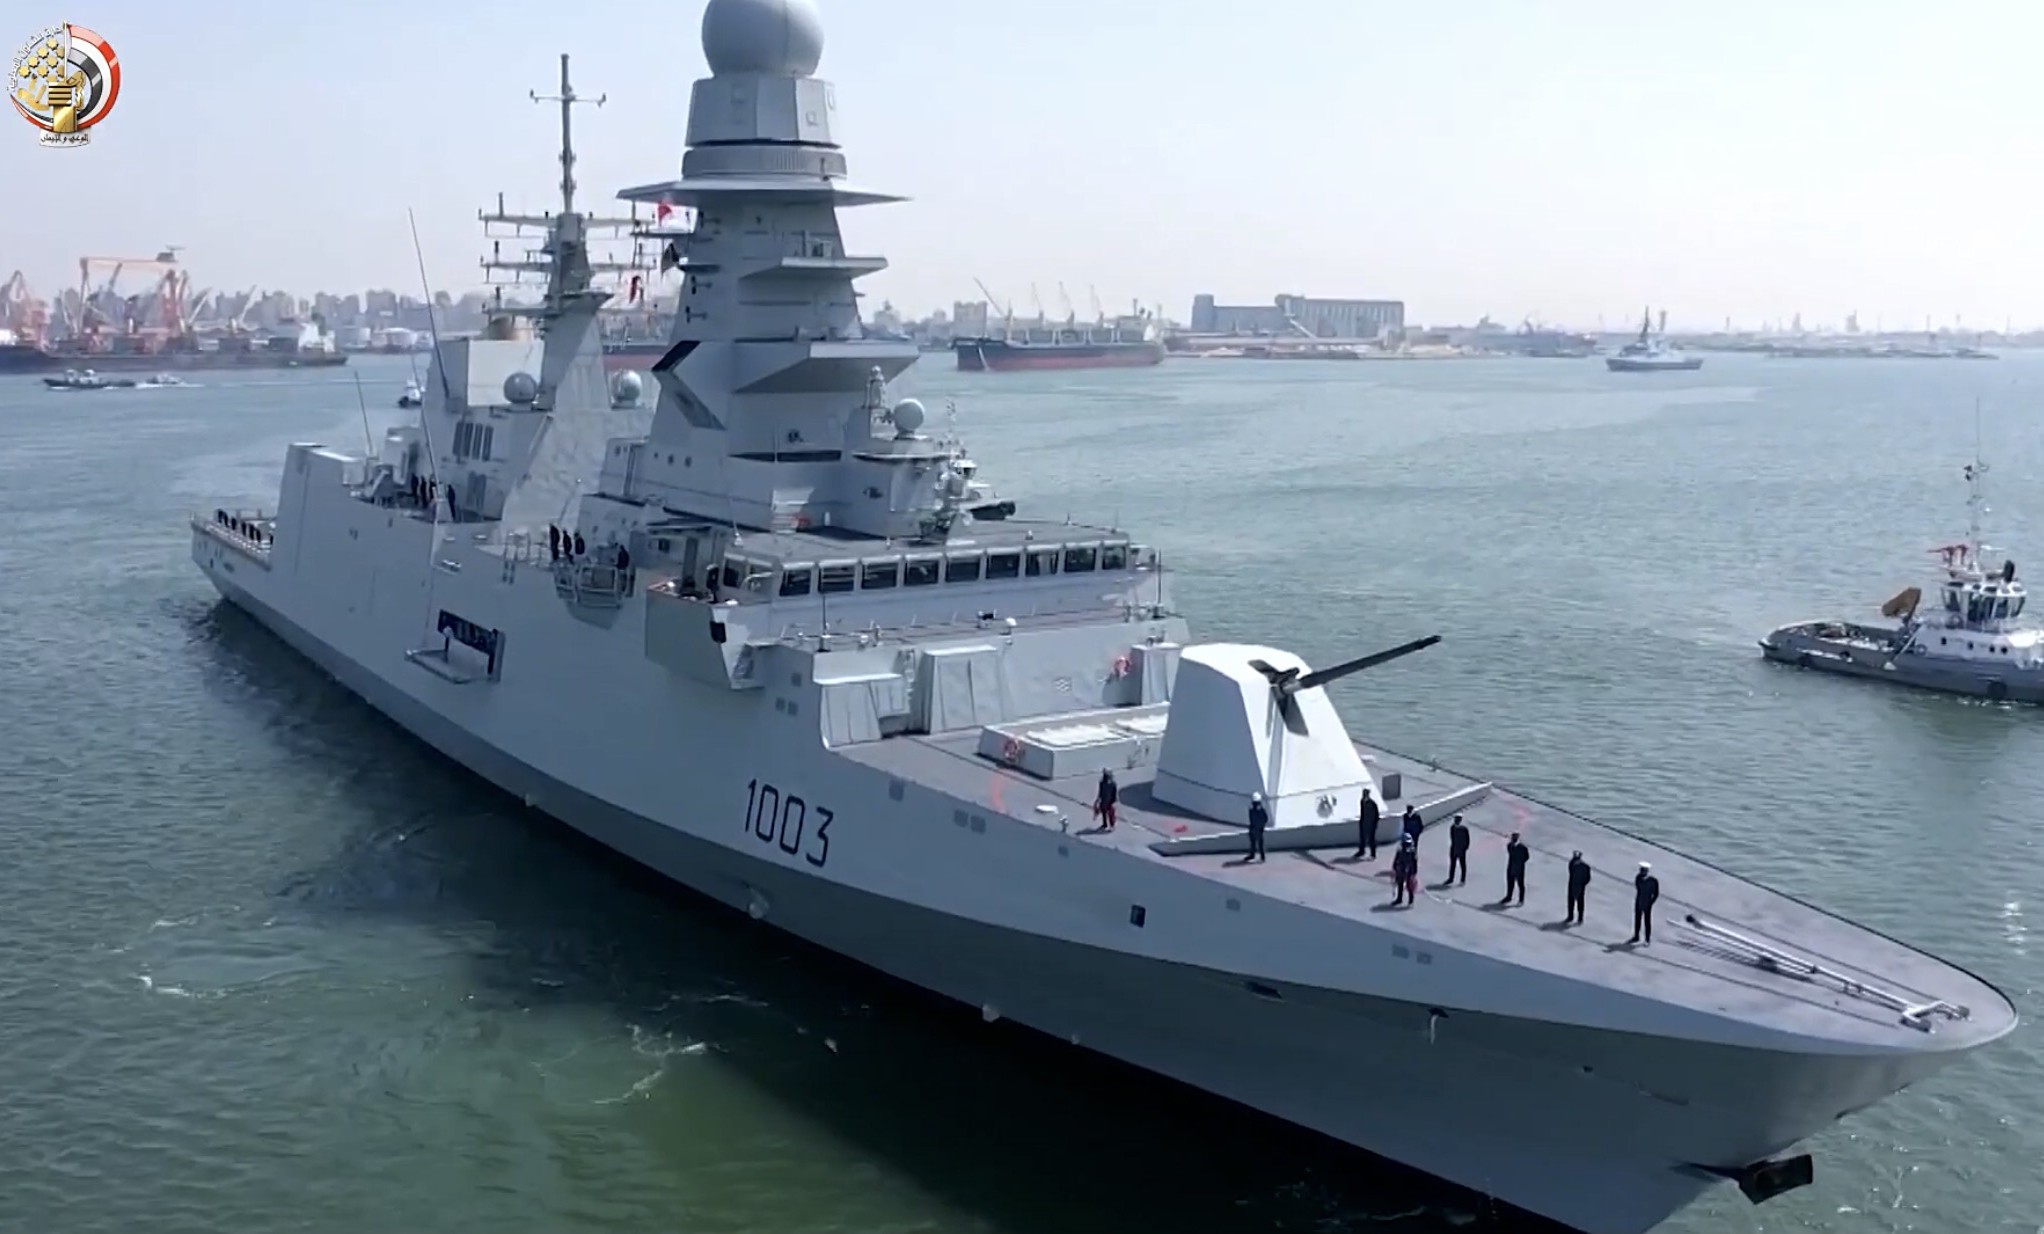 ffg-1003 ens bernees fremm class guided missile frigate egyptian naval force navy 03